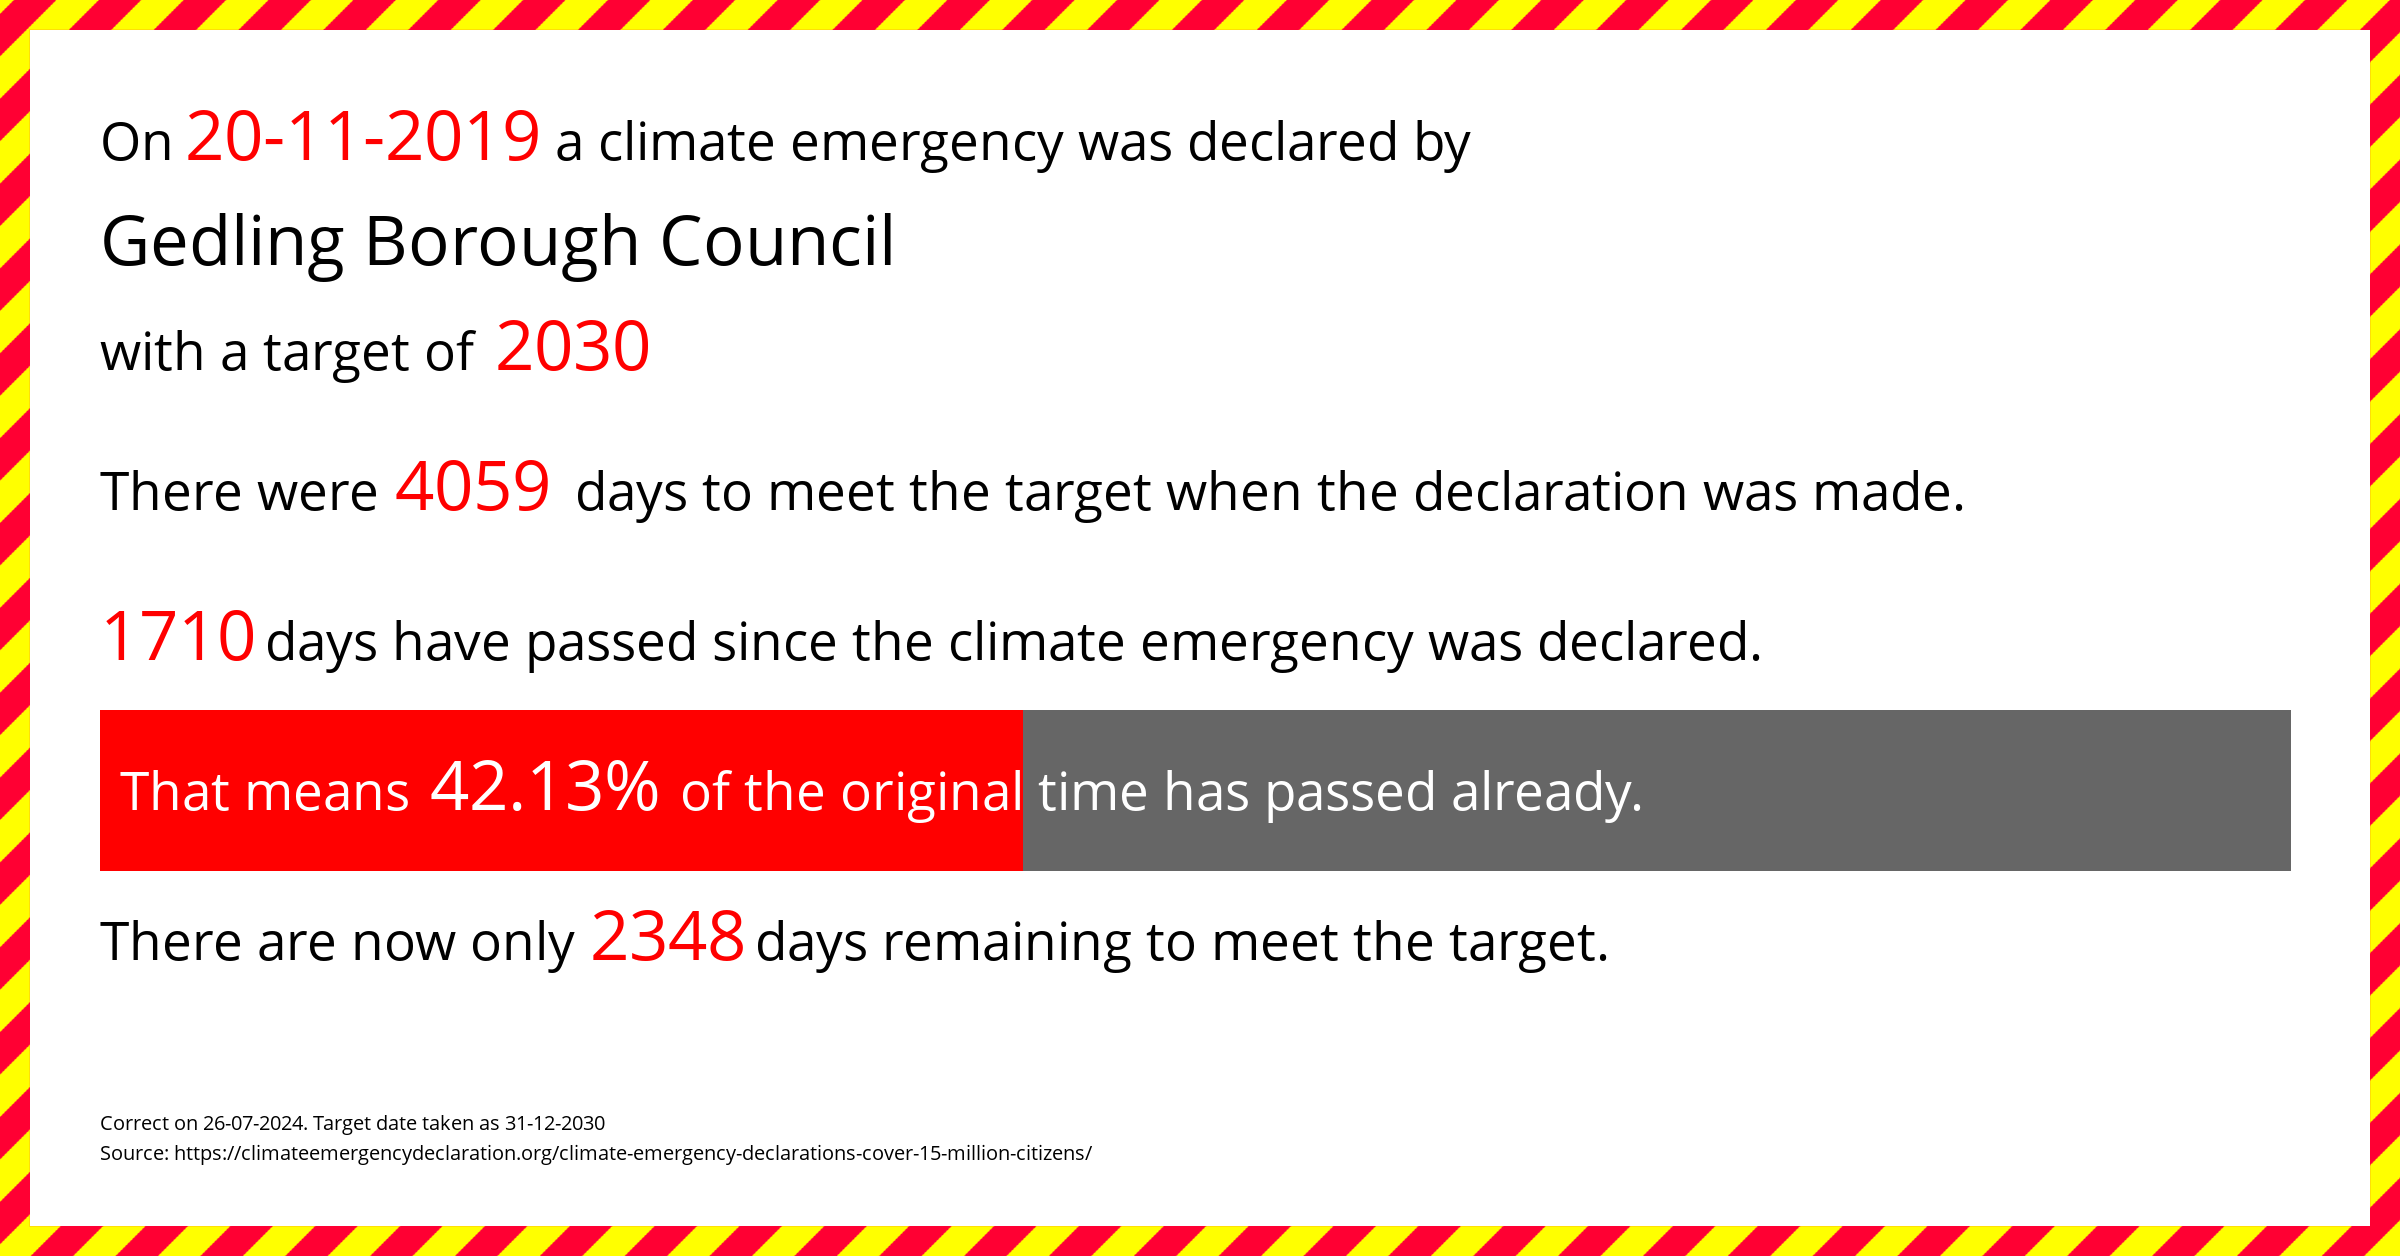 Gedling Borough Council  declared a Climate emergency on Wednesday 20th November 2019, with a target of 2030.